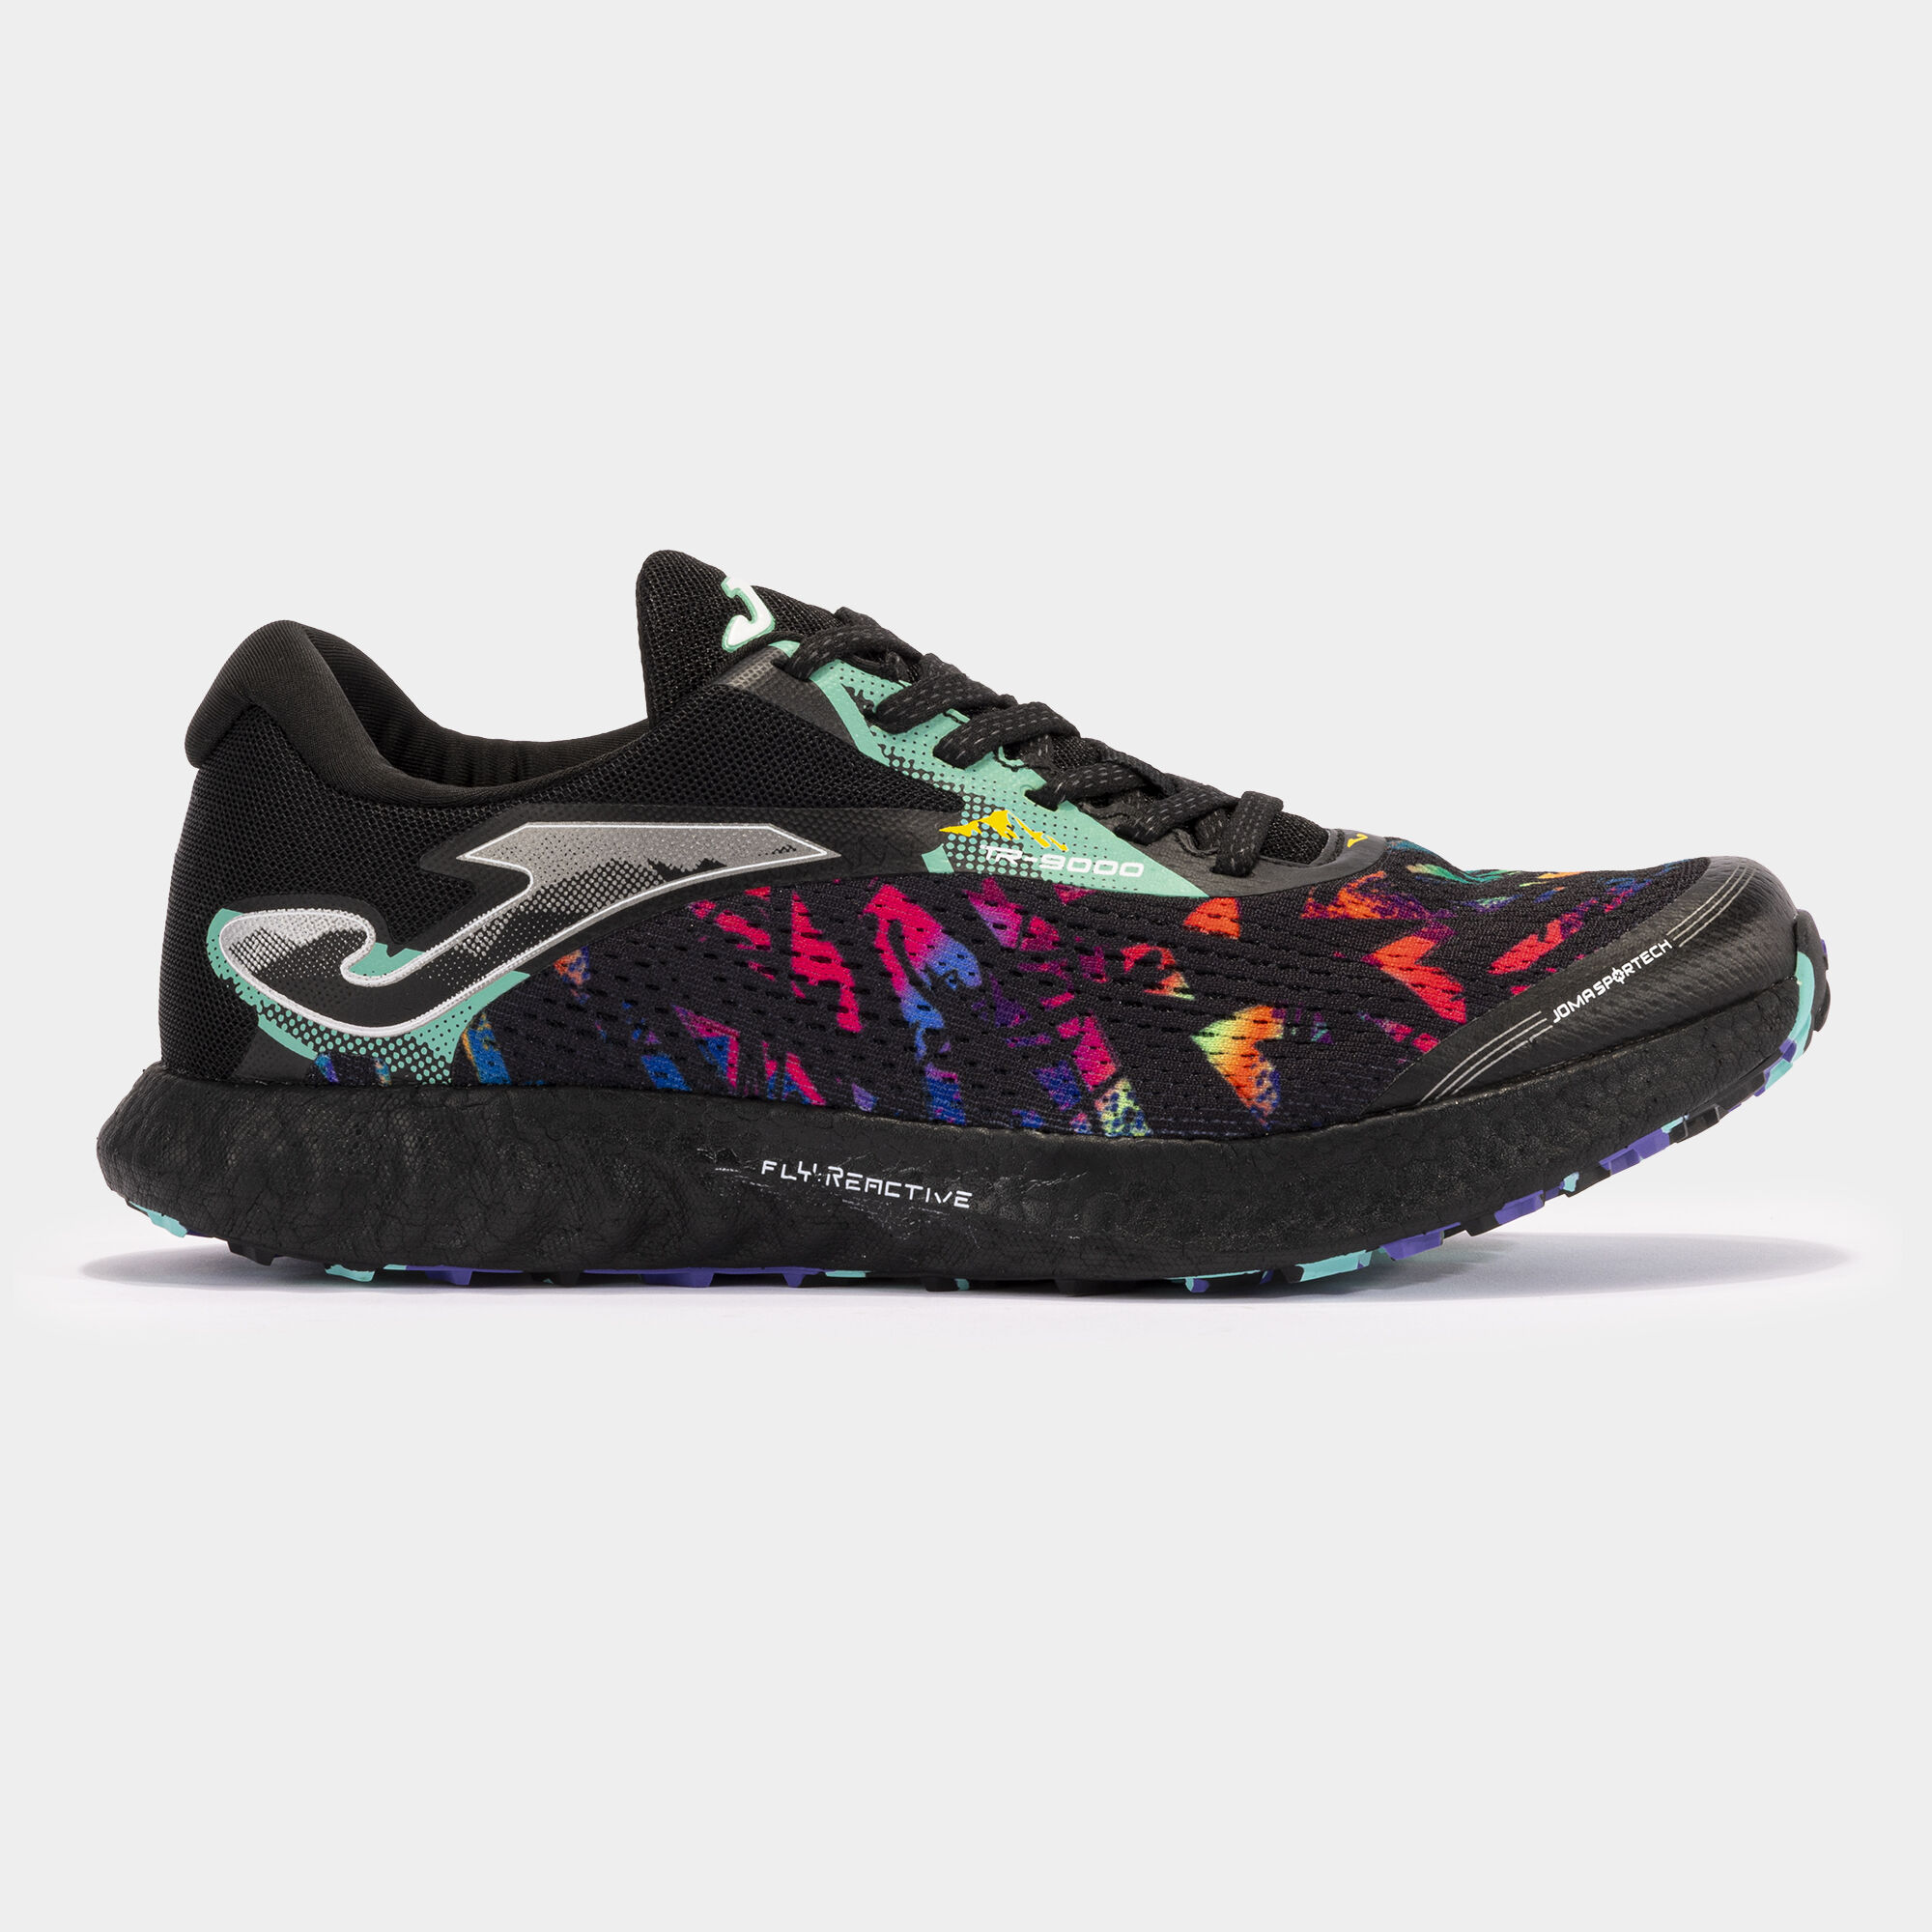 Trail-running shoes Tr-9000 24 unisex black multi color